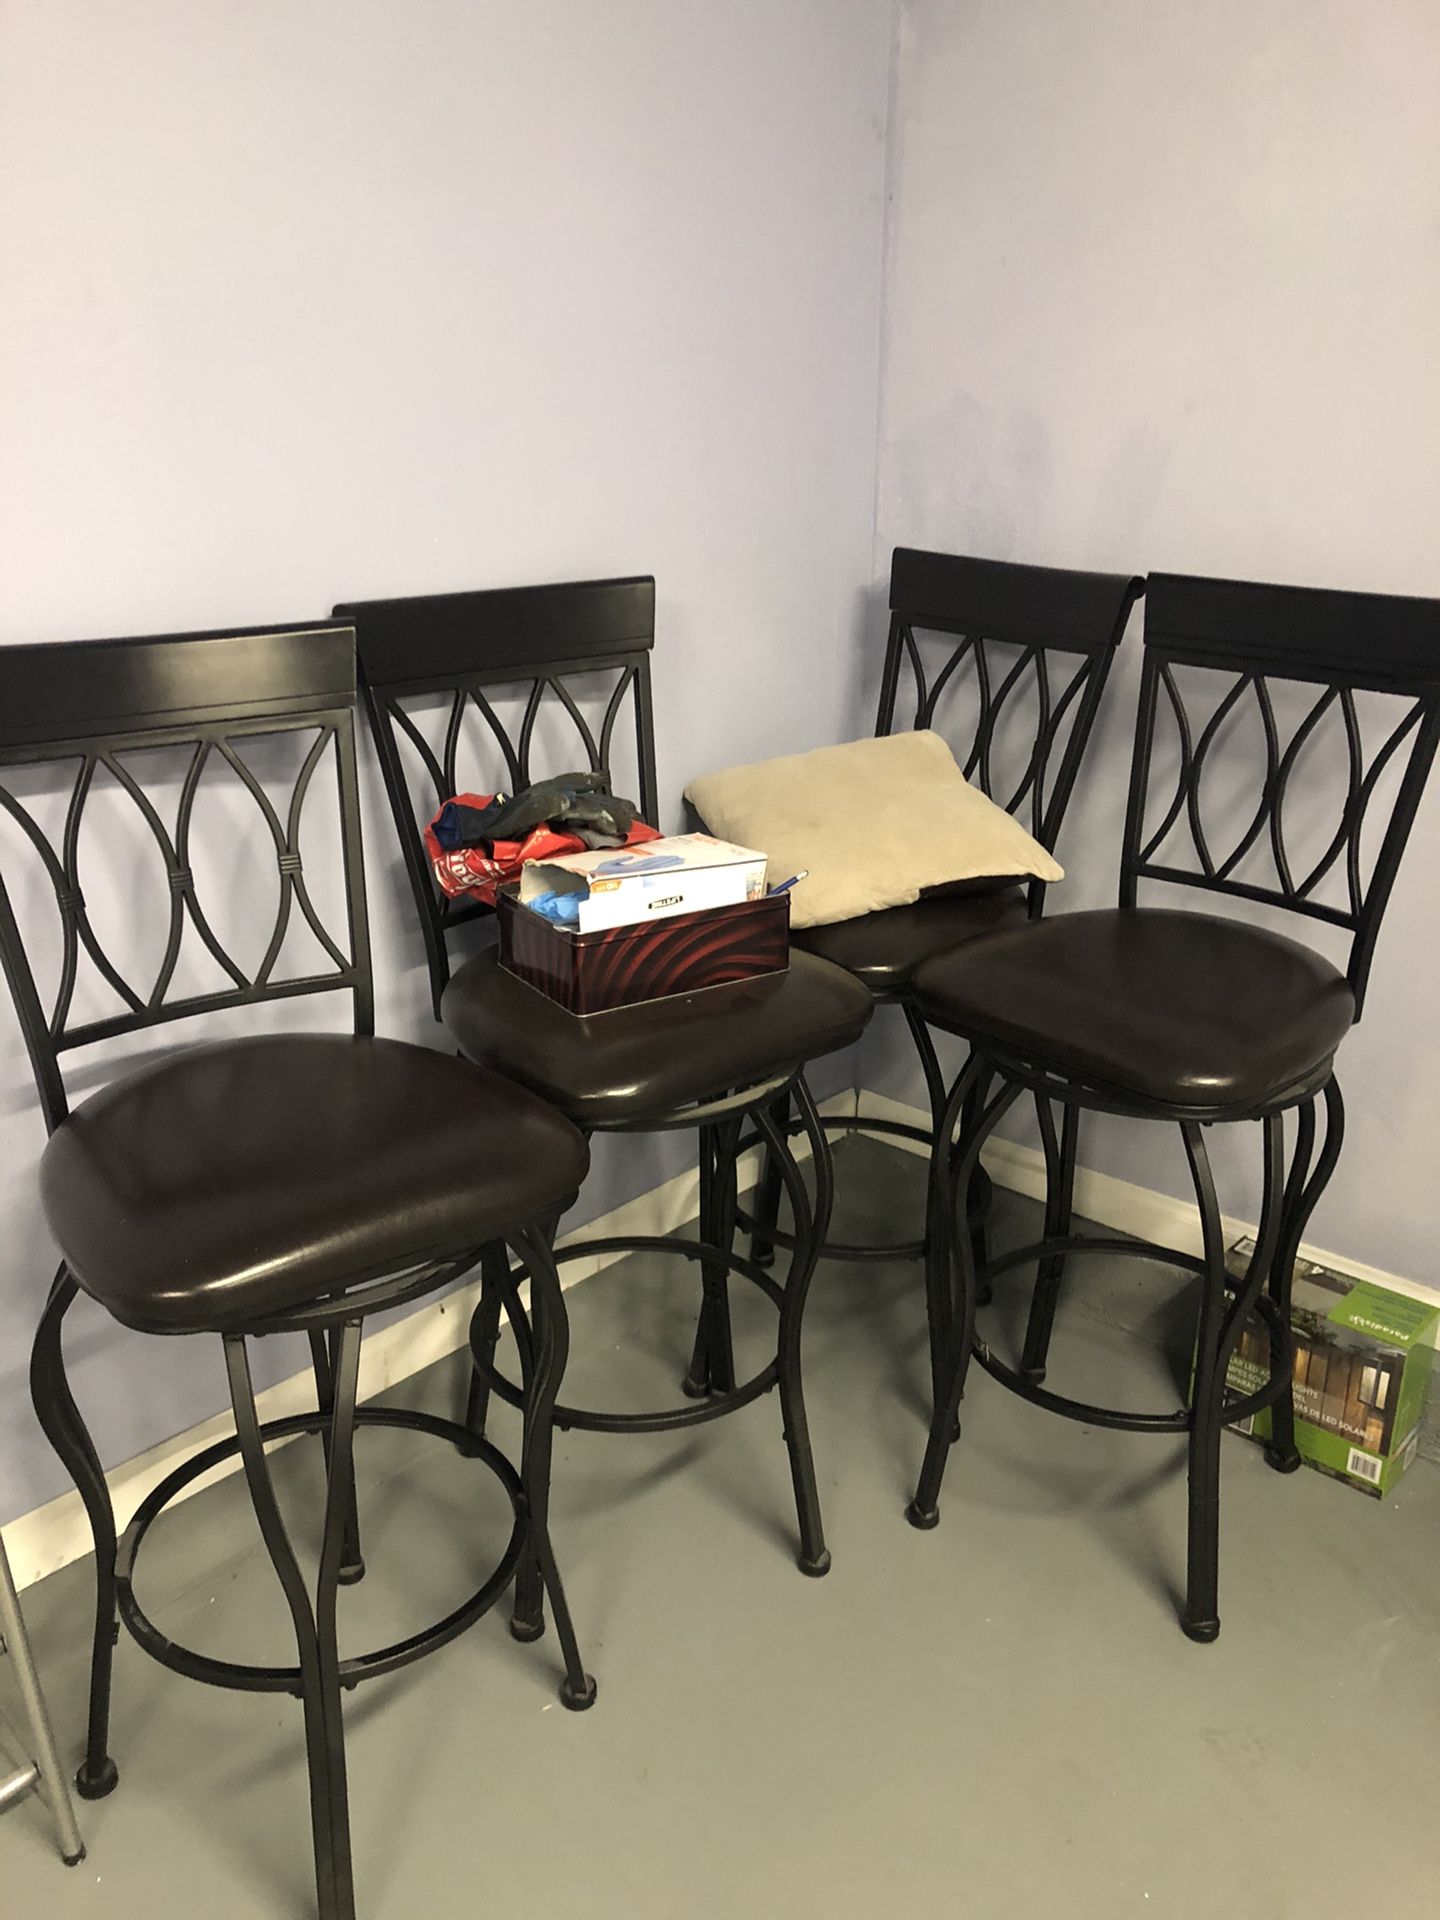 4 Tall chairs